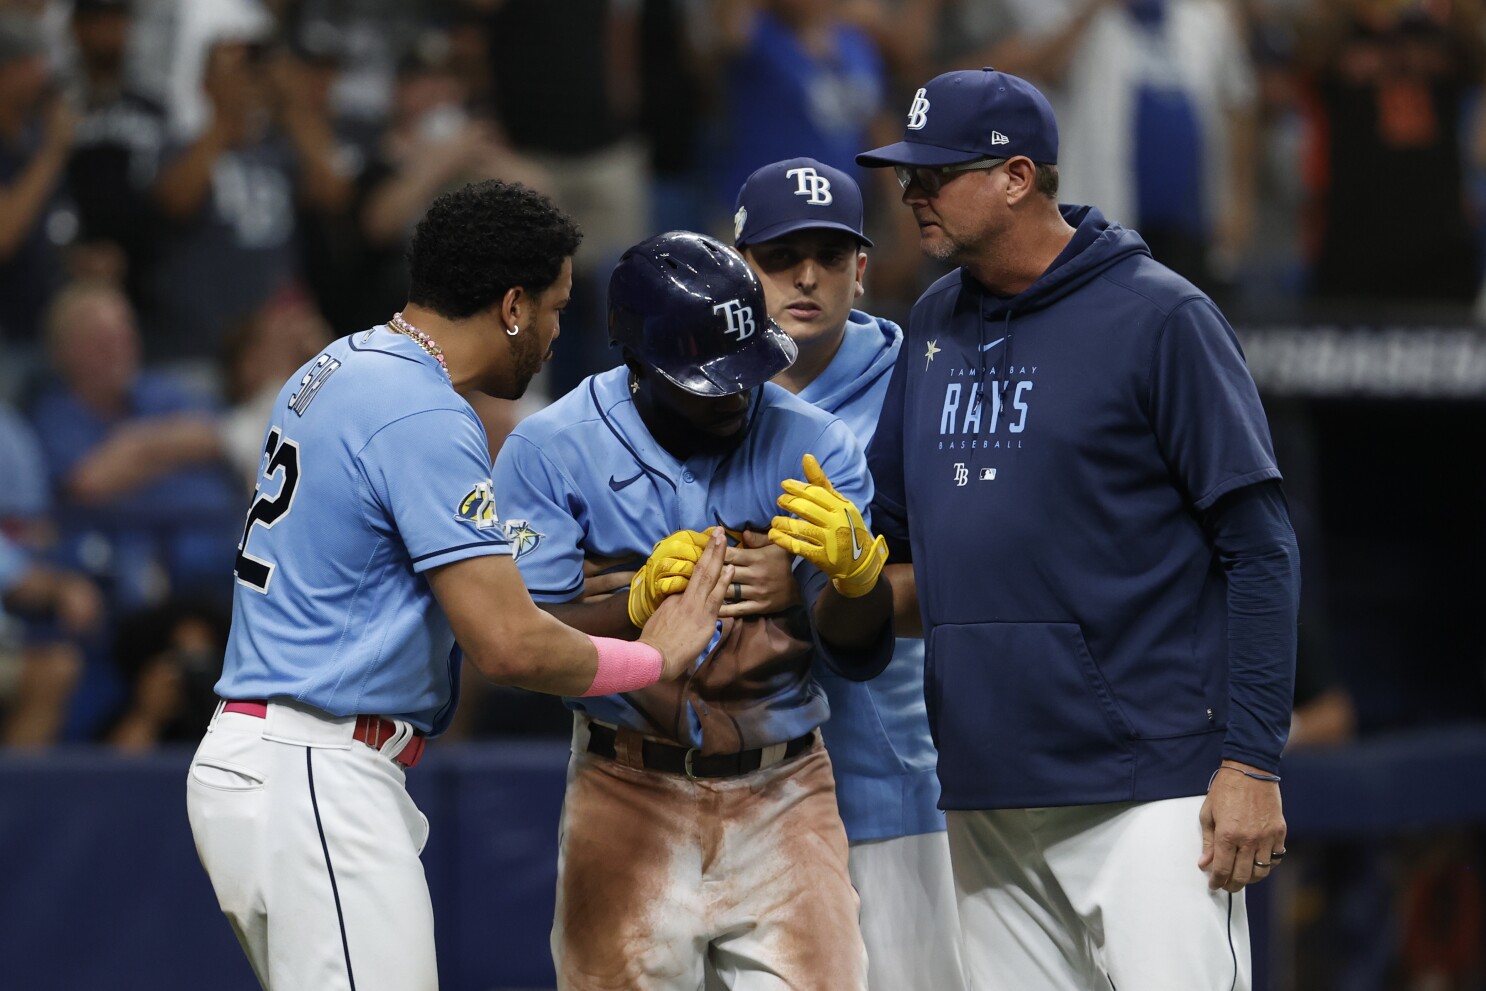 New York Yankees vs. Tampa Bay Rays: Series preview, probable